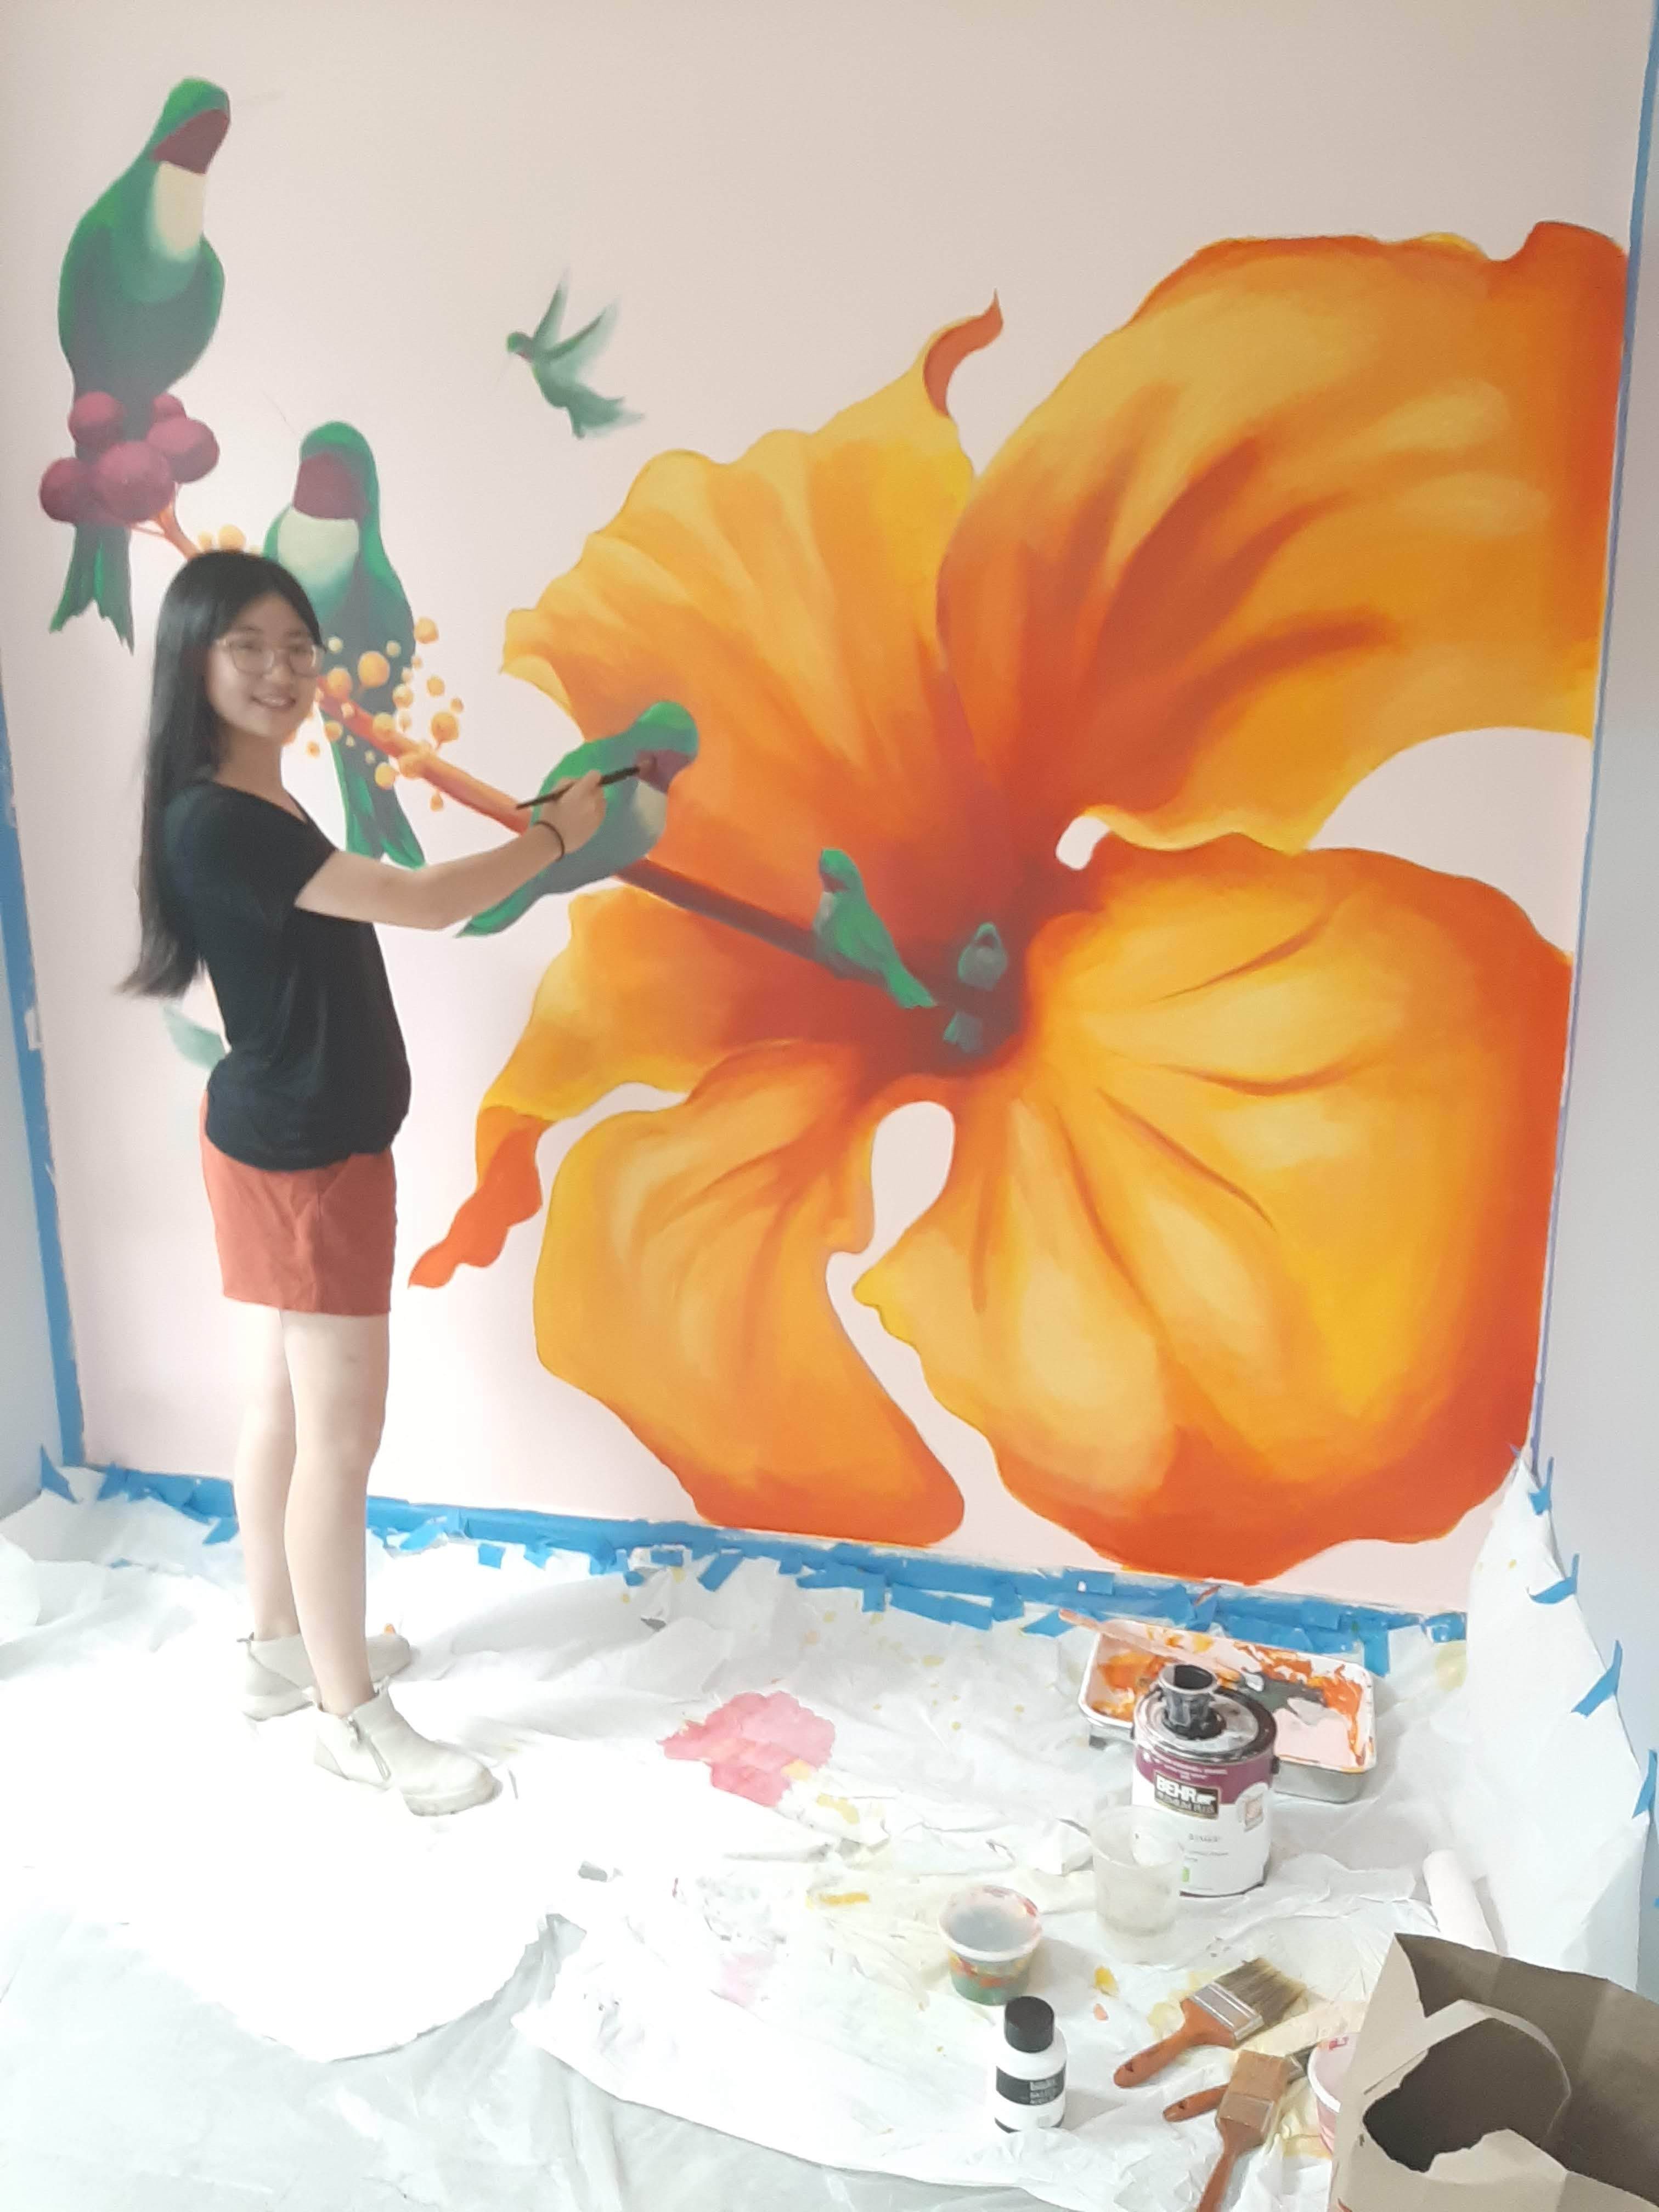 Shenendehowa Student Shares Her Creative Talents